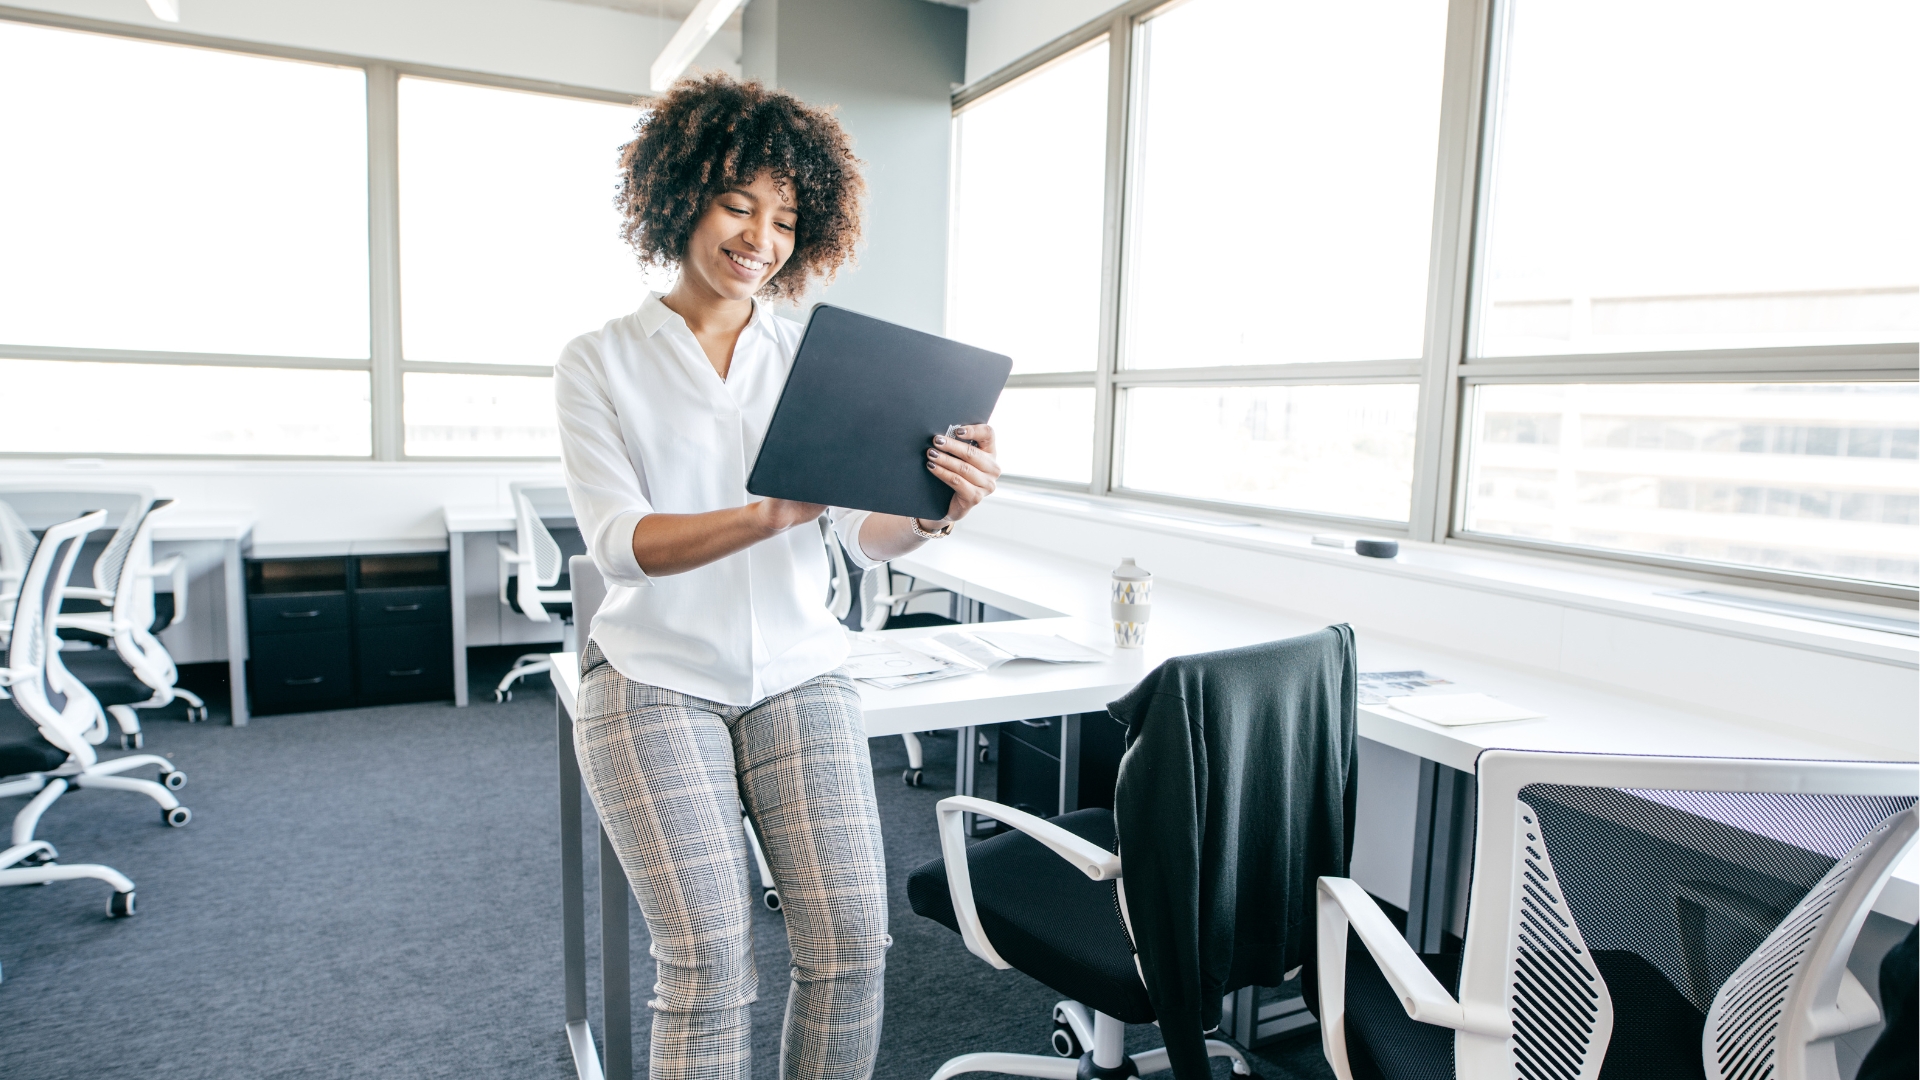 A woman with curly hair wearing a plain white shirt and patterned fabric pants is sitting at her office desk holding an ipad doing personalized account management.